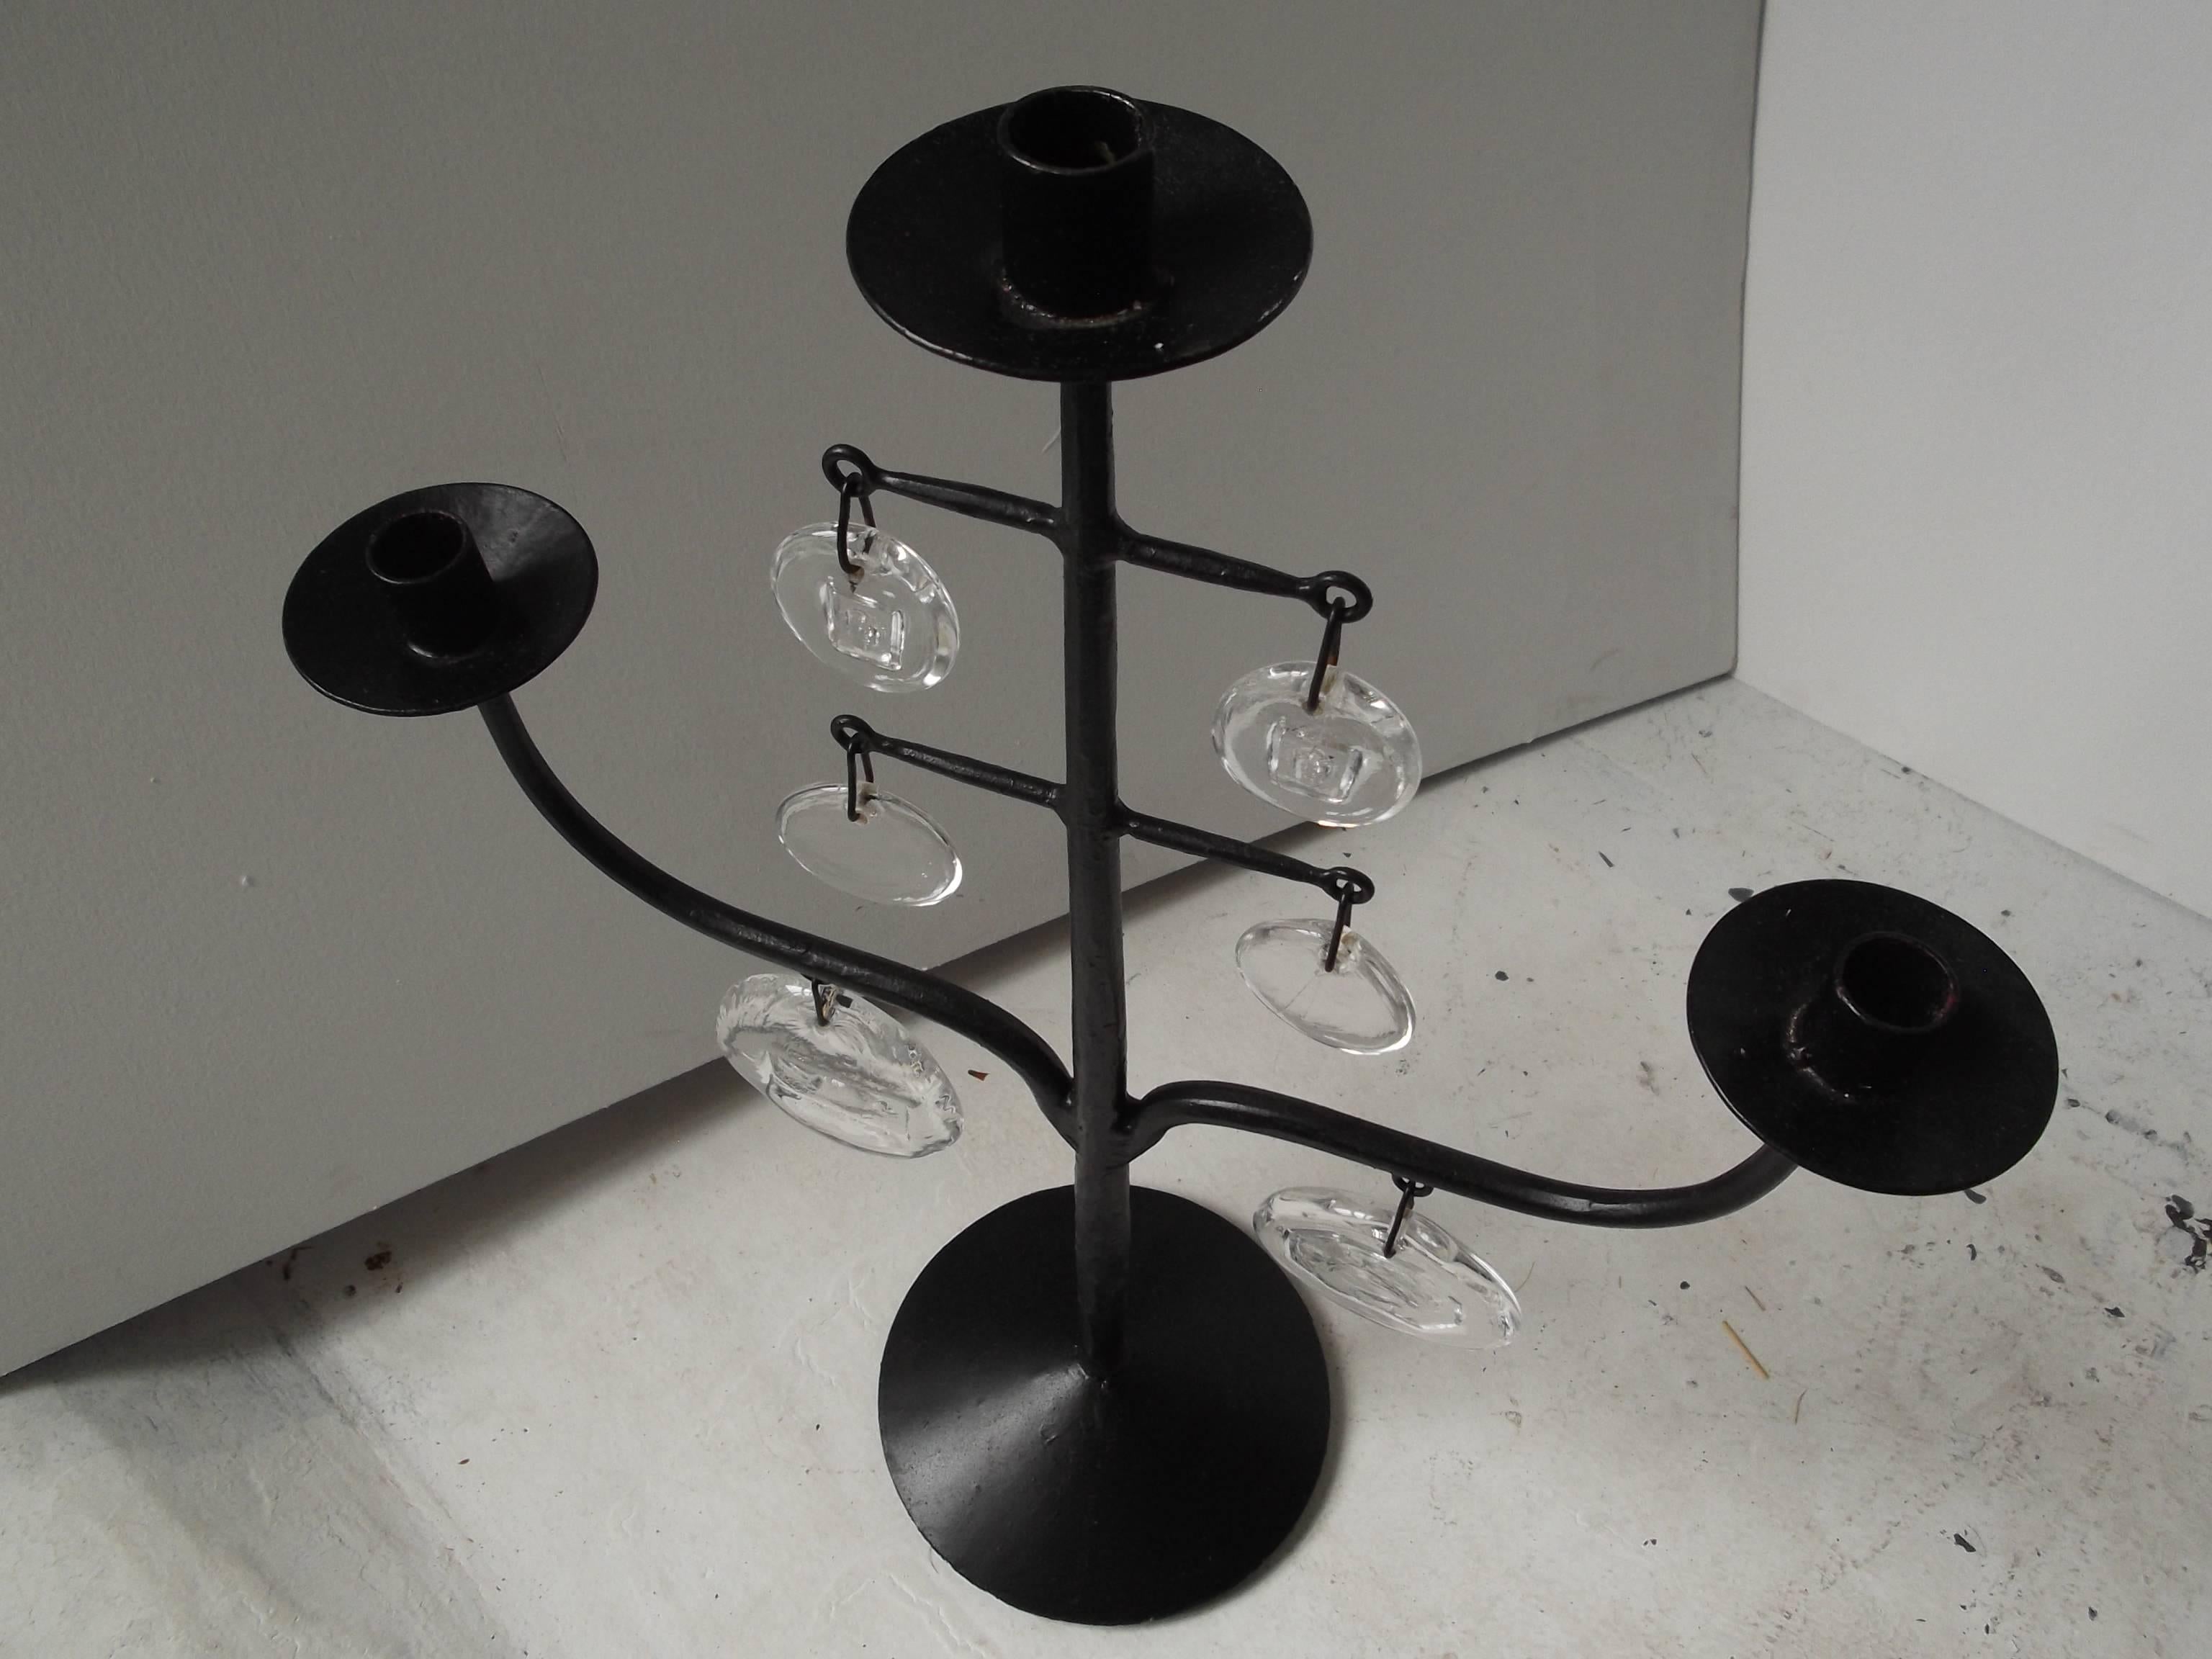 This is a wonderful candelabra by Erik Hoglund for Kosta Boda. It is a vintage piece from the 1960s era. It stands quite tall at 23